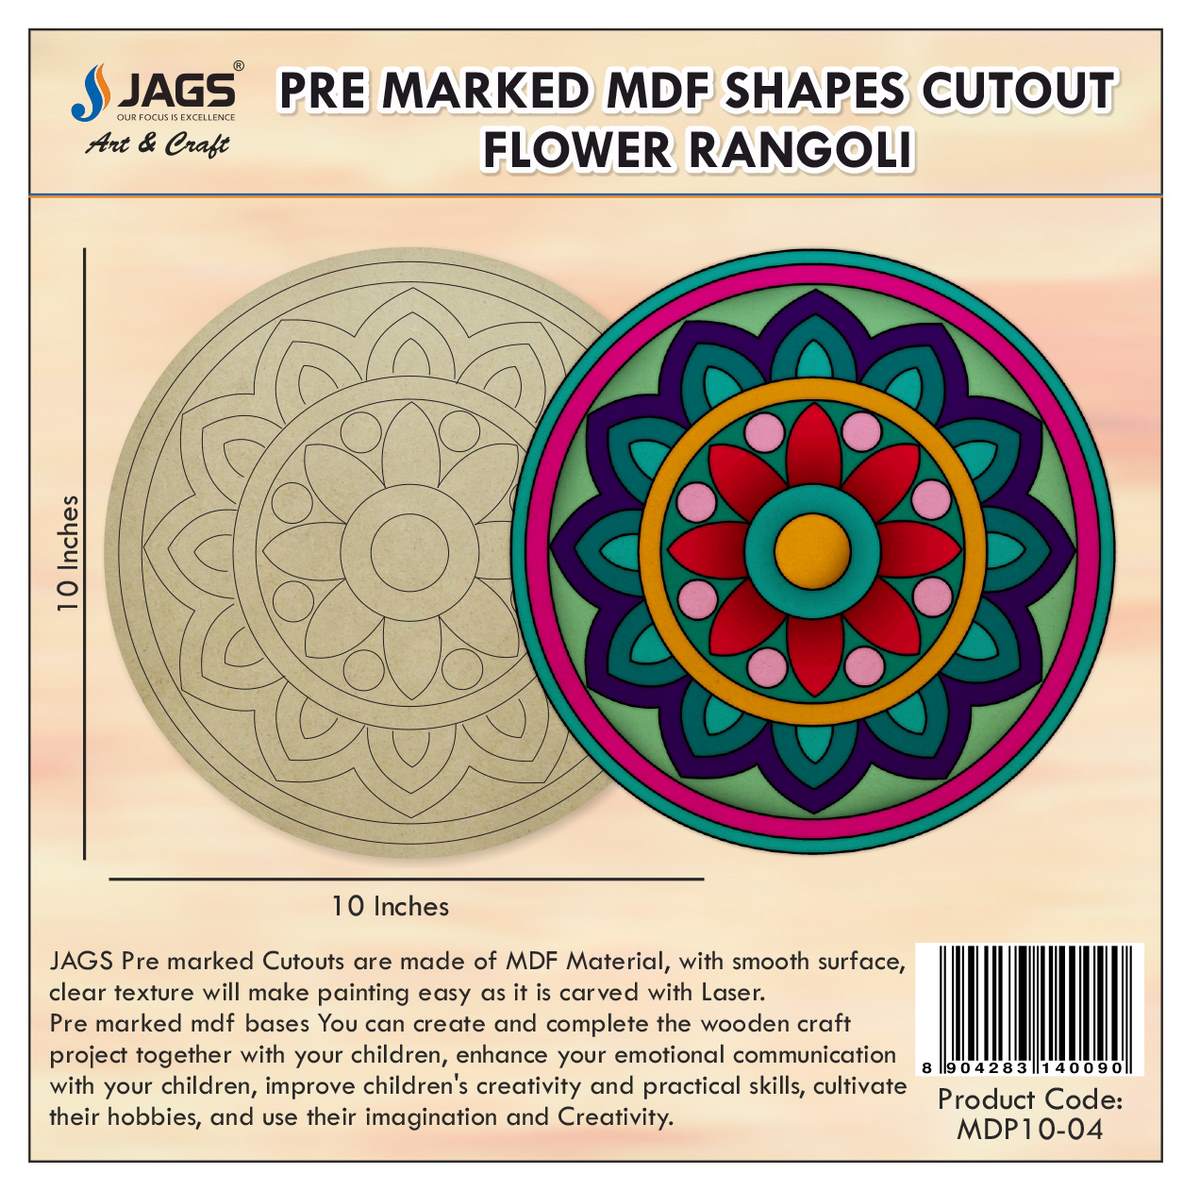 jags-mumbai MDF Pre-marked MDF Flower Rangoli Shapes Cutout for Pichwai Painting and DIY Crafts